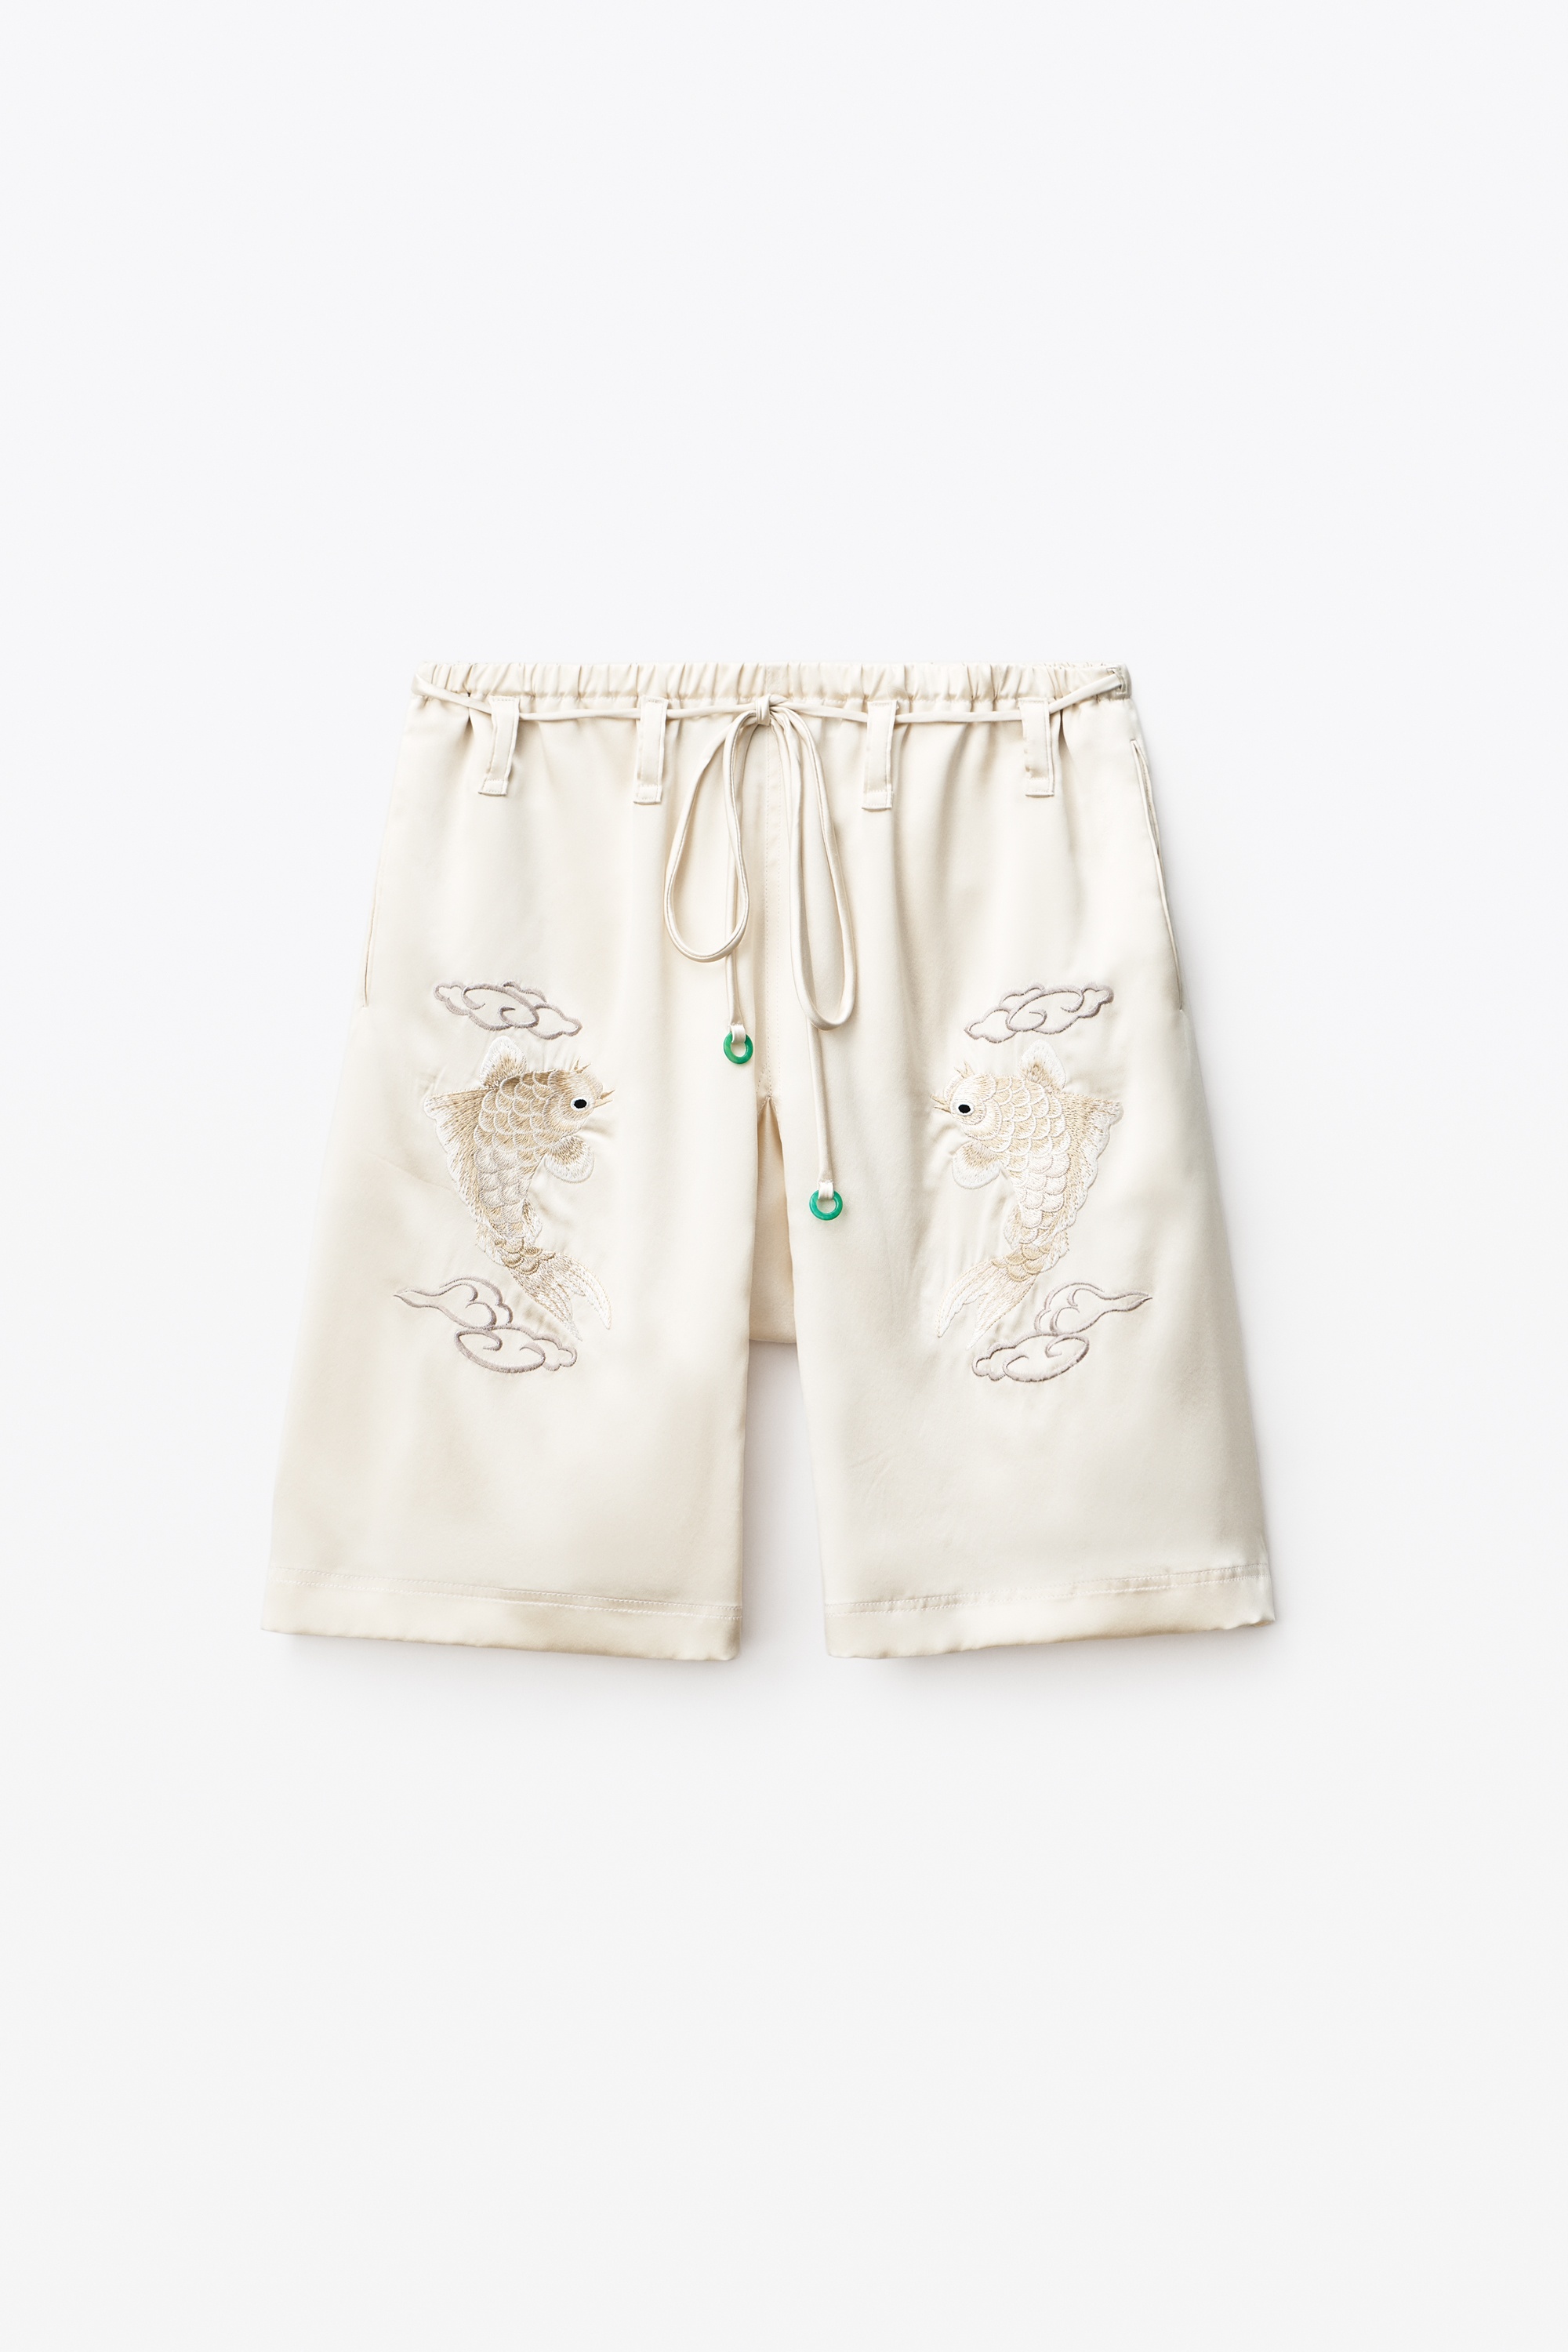 KOI EMBROIDERY SHORT IN SILK CHARMEUSE - 1